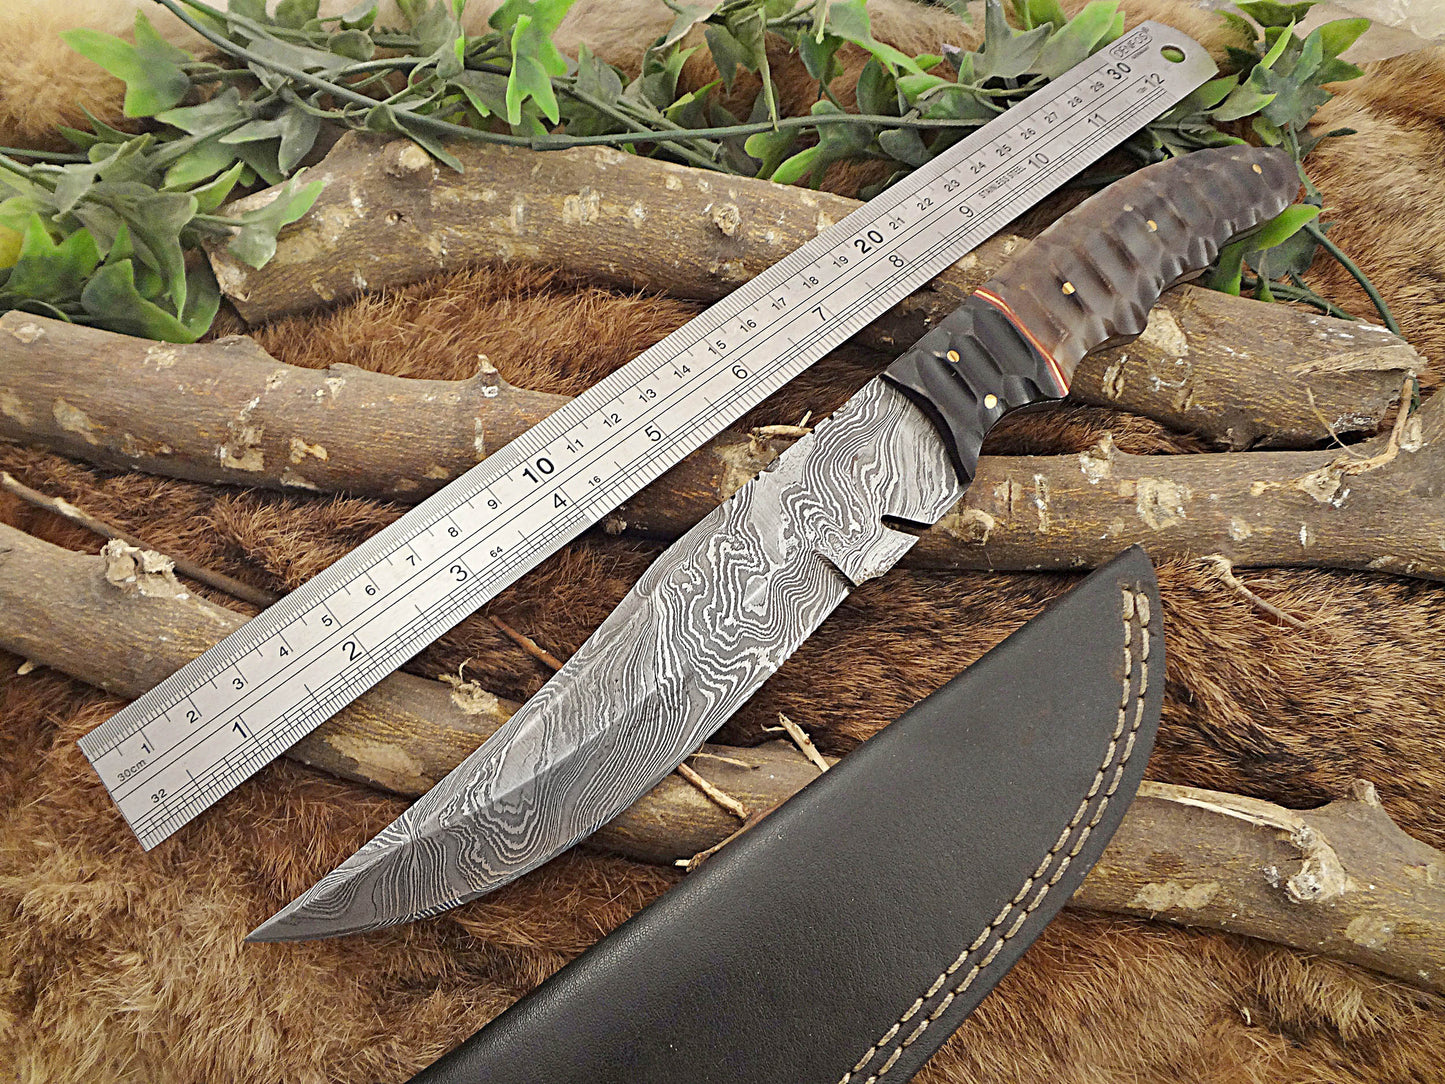 12" DAMASCUS SKINNING HUNTING FULL TANG BLADE KNIFE, JIGGED BULL HORN SCALE, COW HIDE LEATHER SHEATH INCLUDED